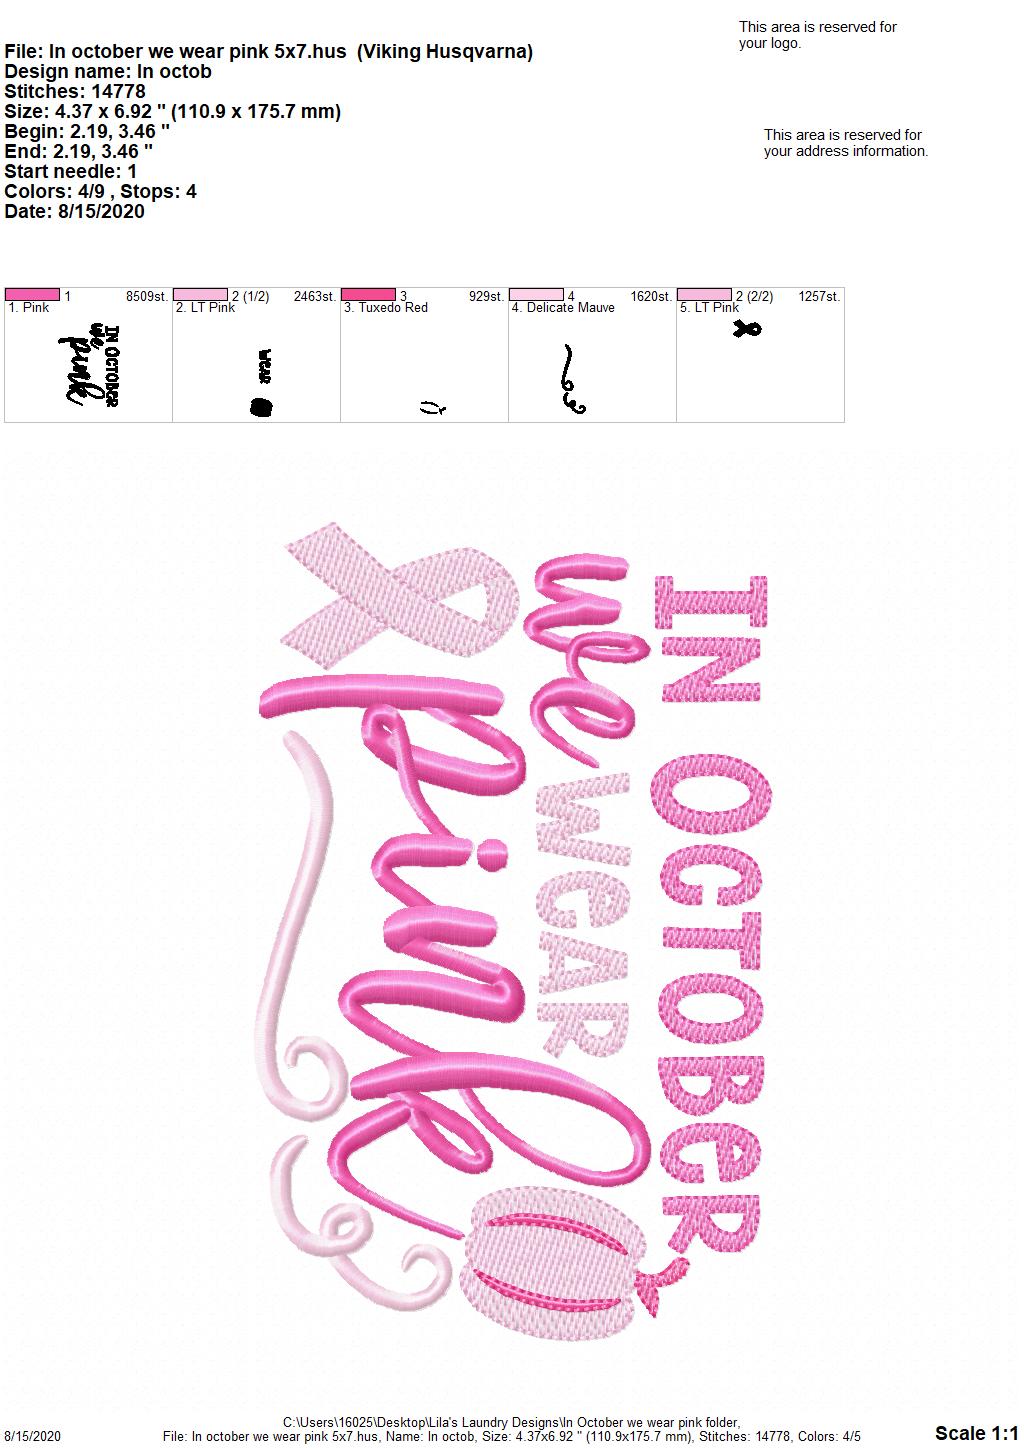 In October We Wear Pink - 3 Sizes - Digital Embroidery Design